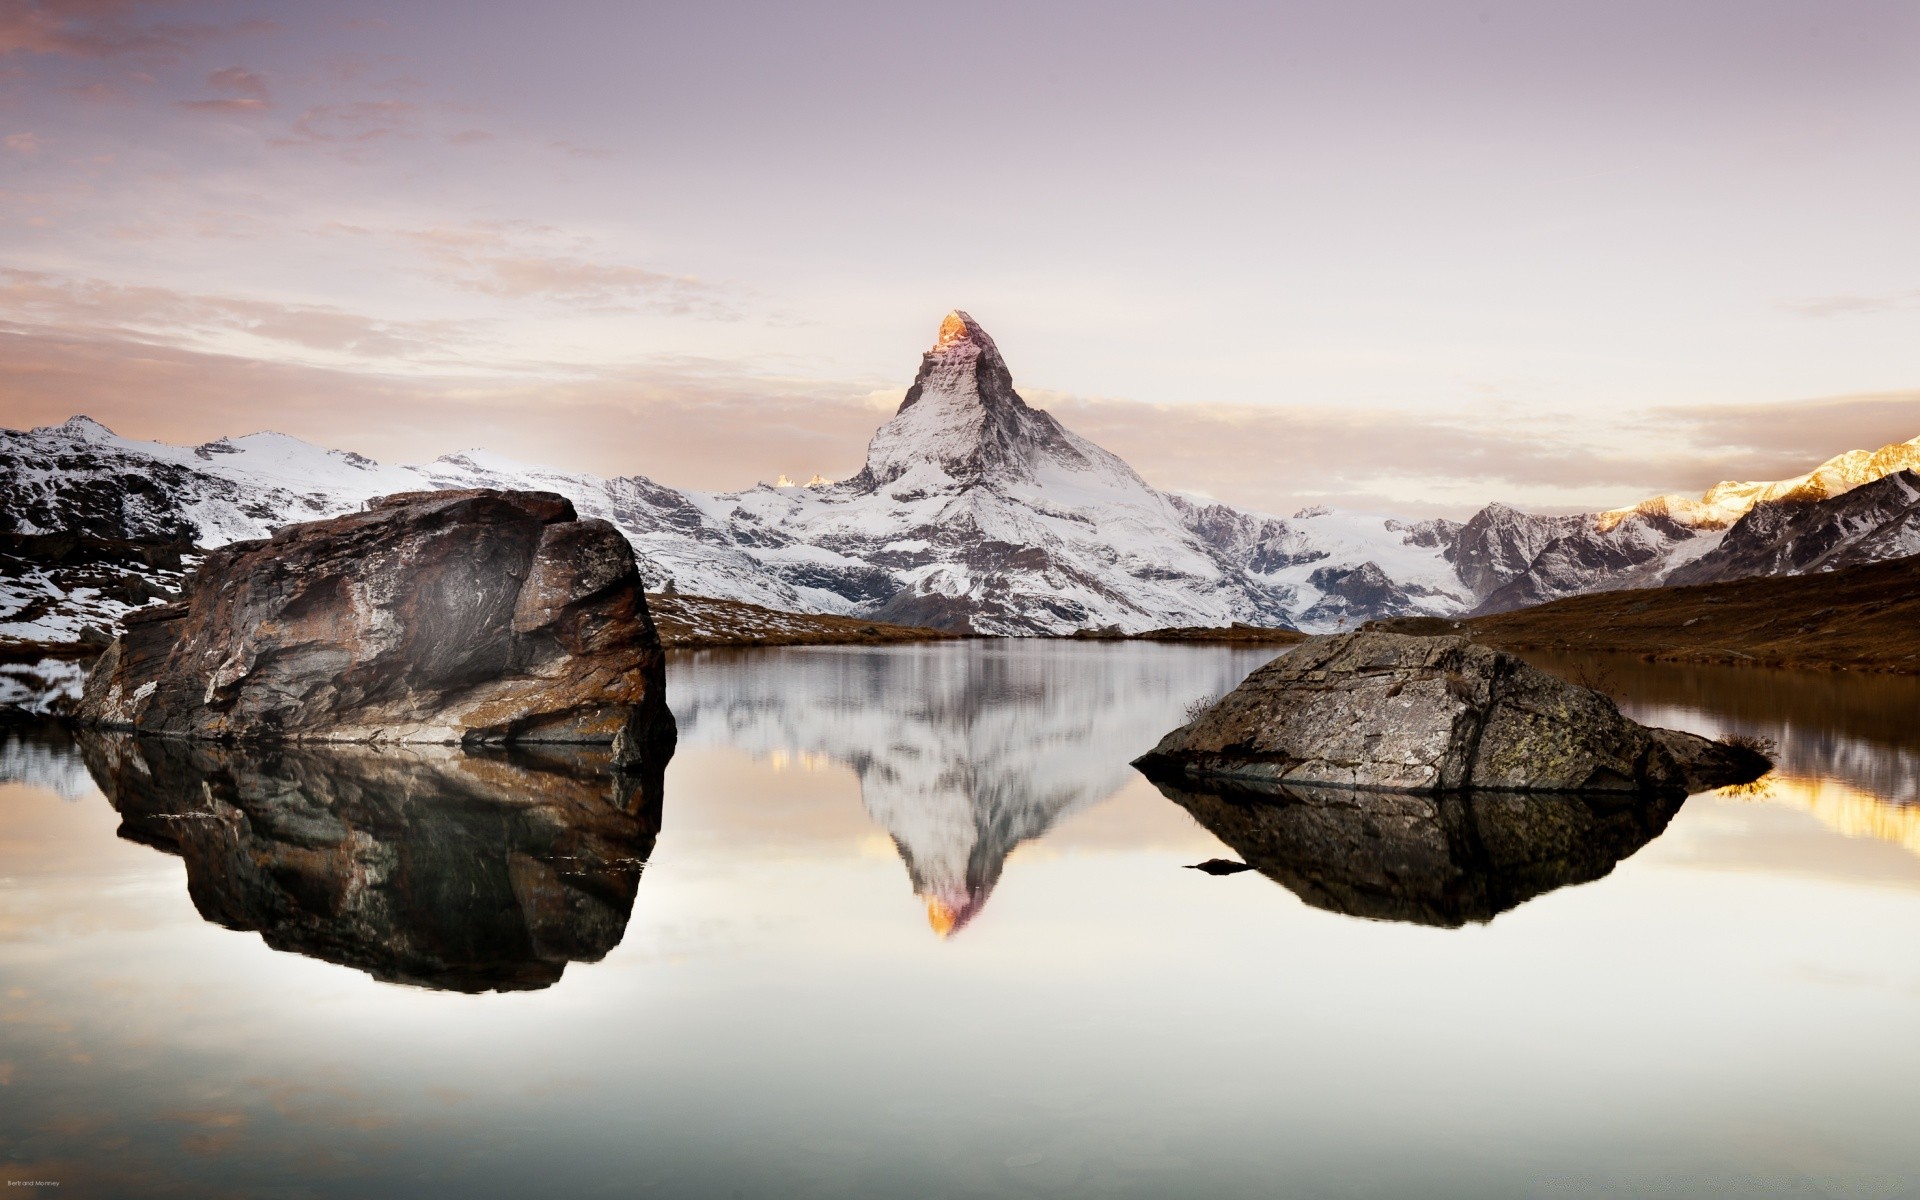 europe nature snow landscape water mountain ice cold rock sky travel winter dawn reflection